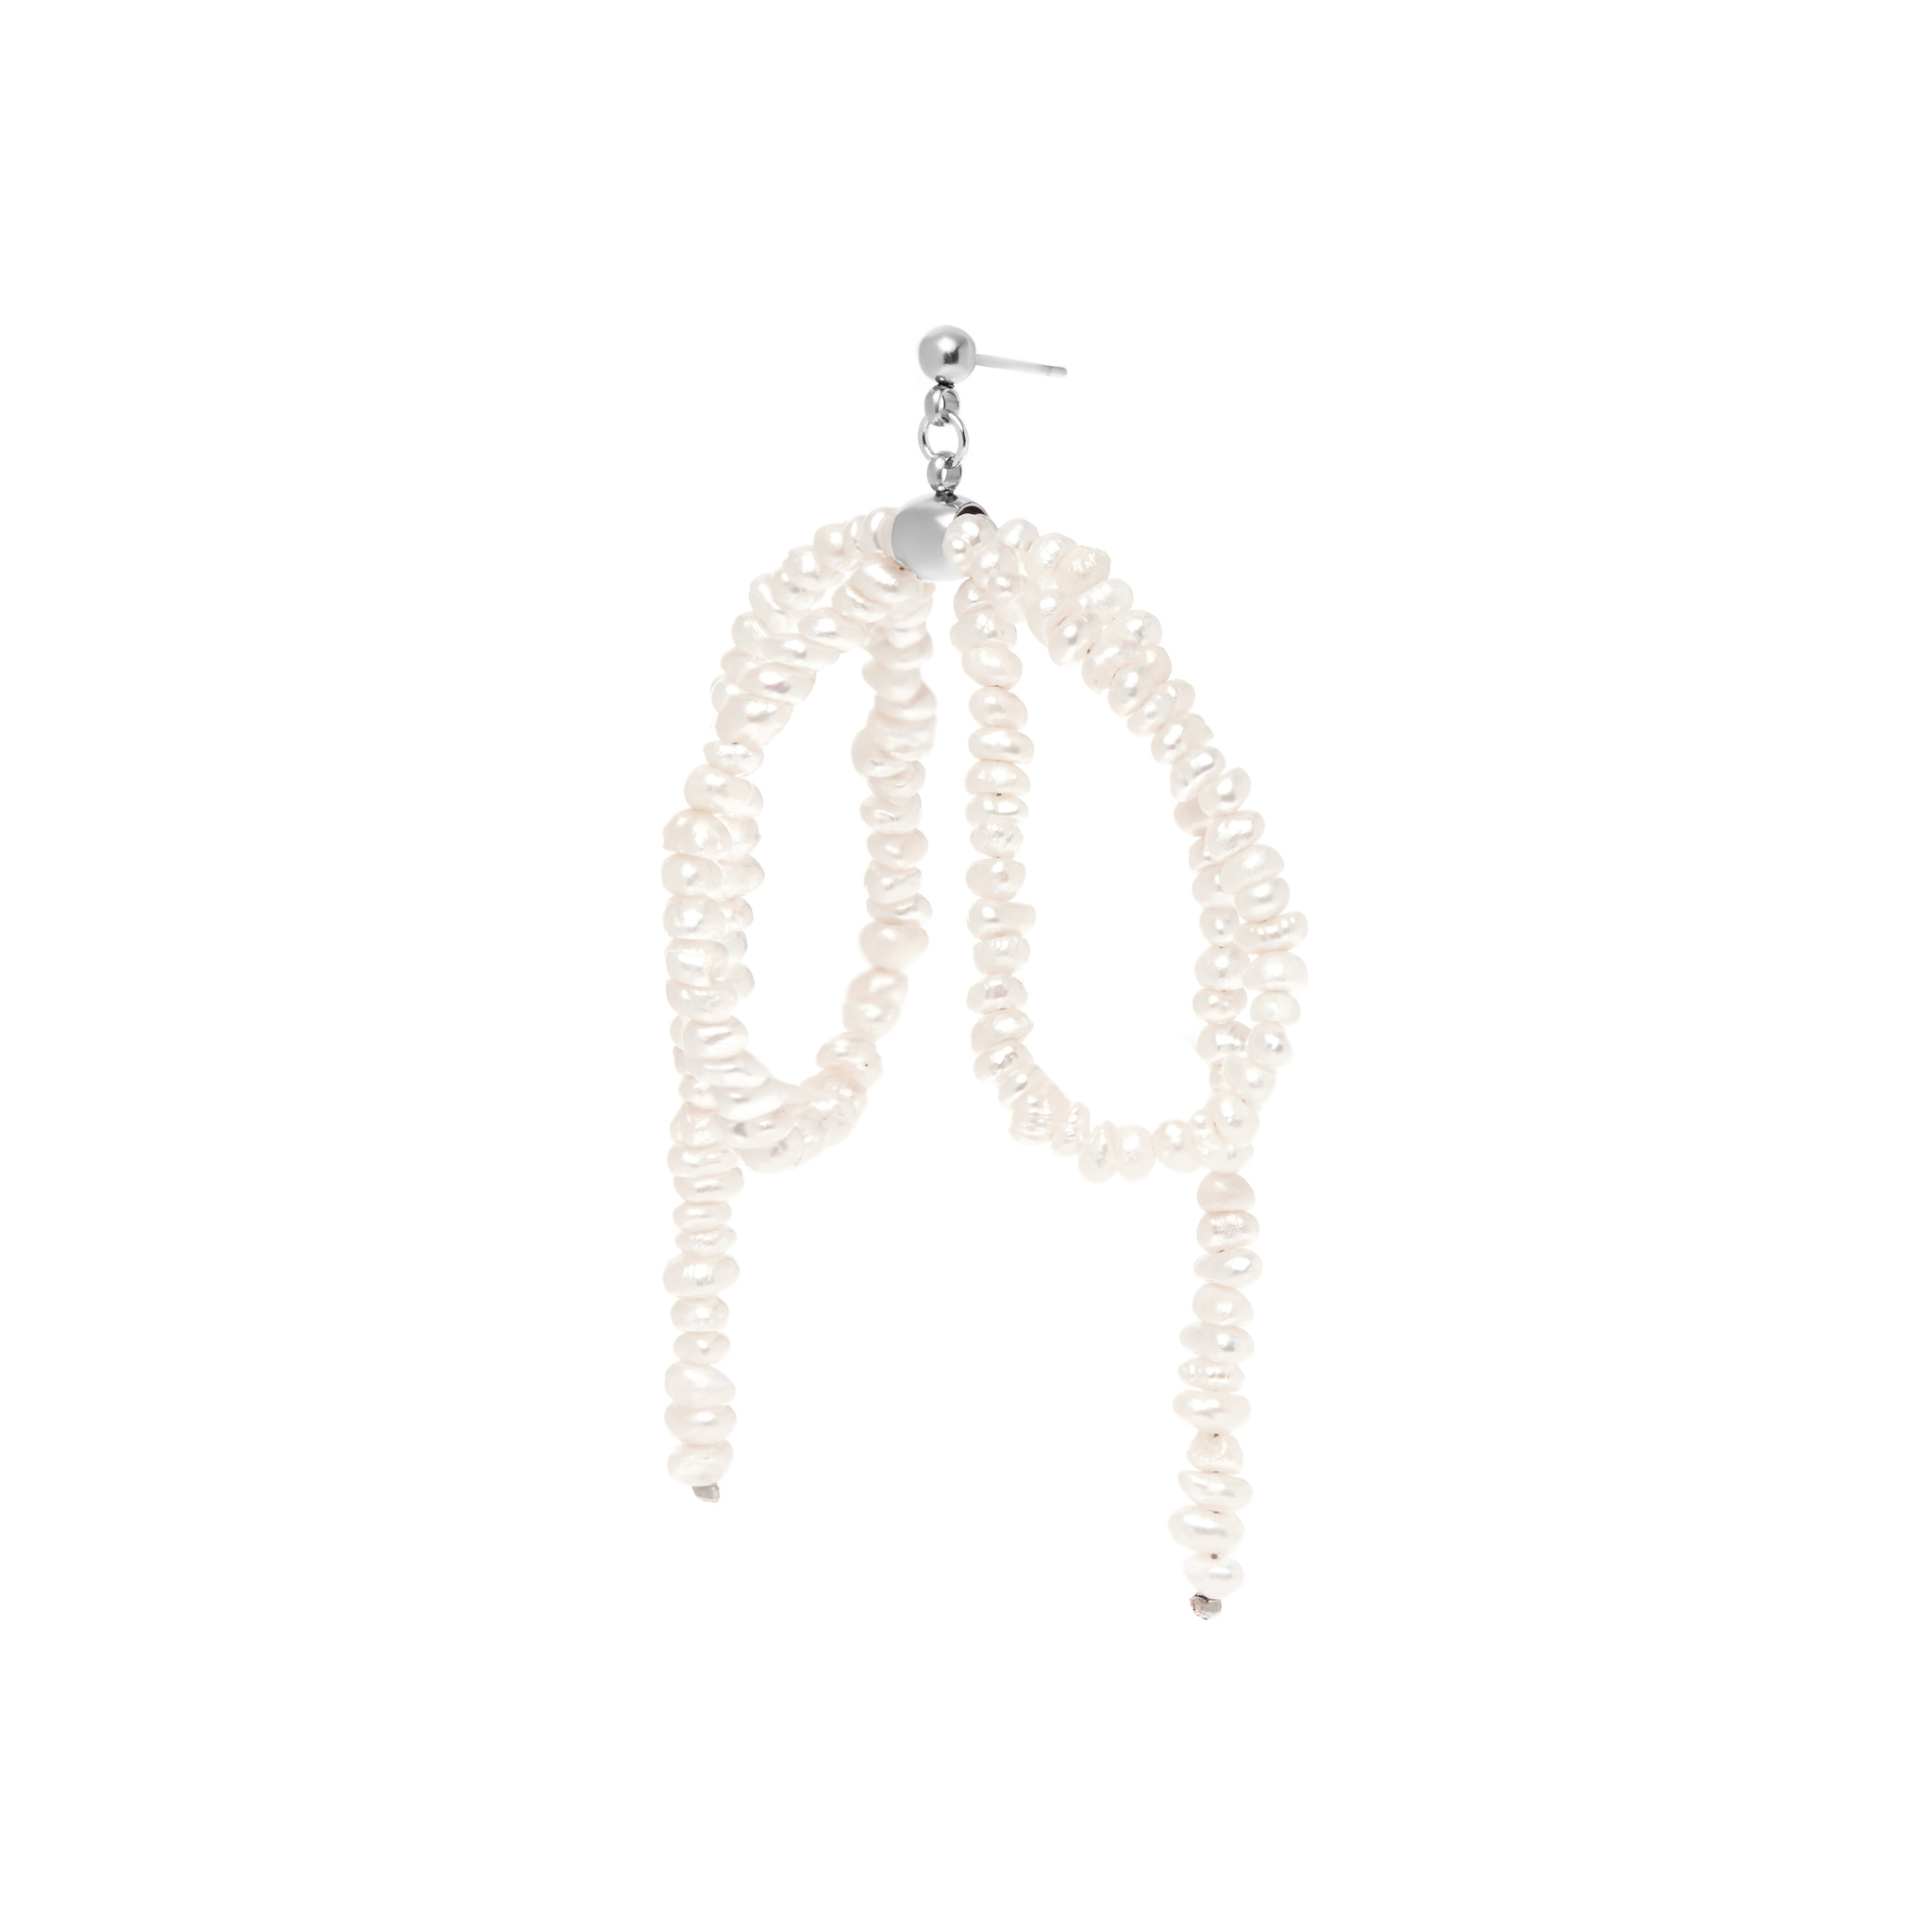 HOLLY JUNE Серьга Pearly Bow Earring holly june серьга pearly mess earring